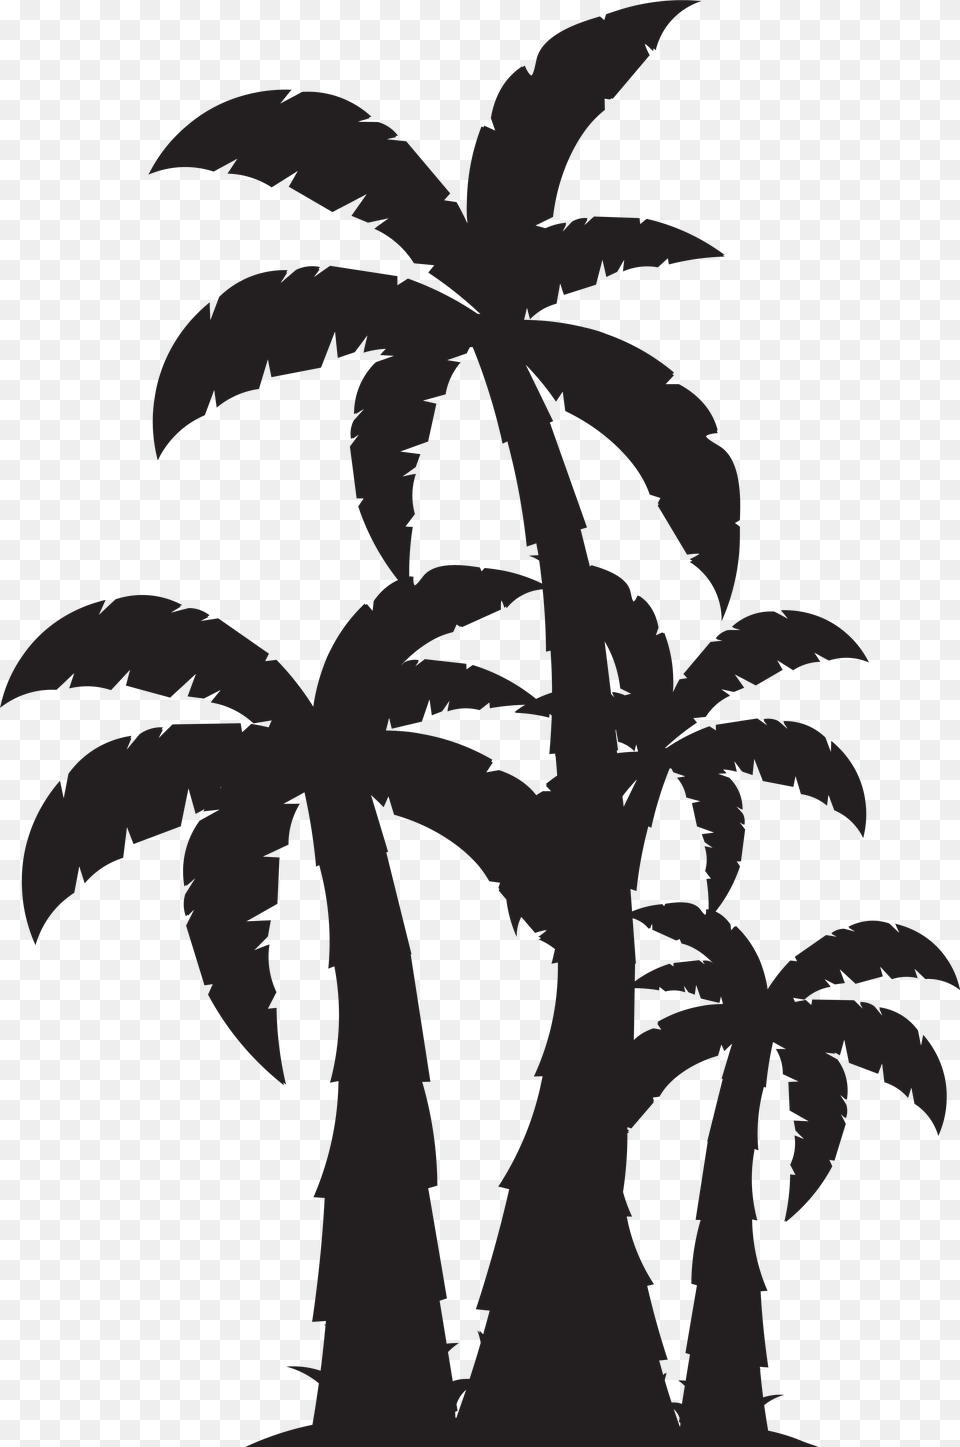 Palm Trees Silhouette Clip Art Imageu200b Gallery Yopriceville Palm Trees Svg Free, Leaf, Plant, Stencil, Animal Png Image